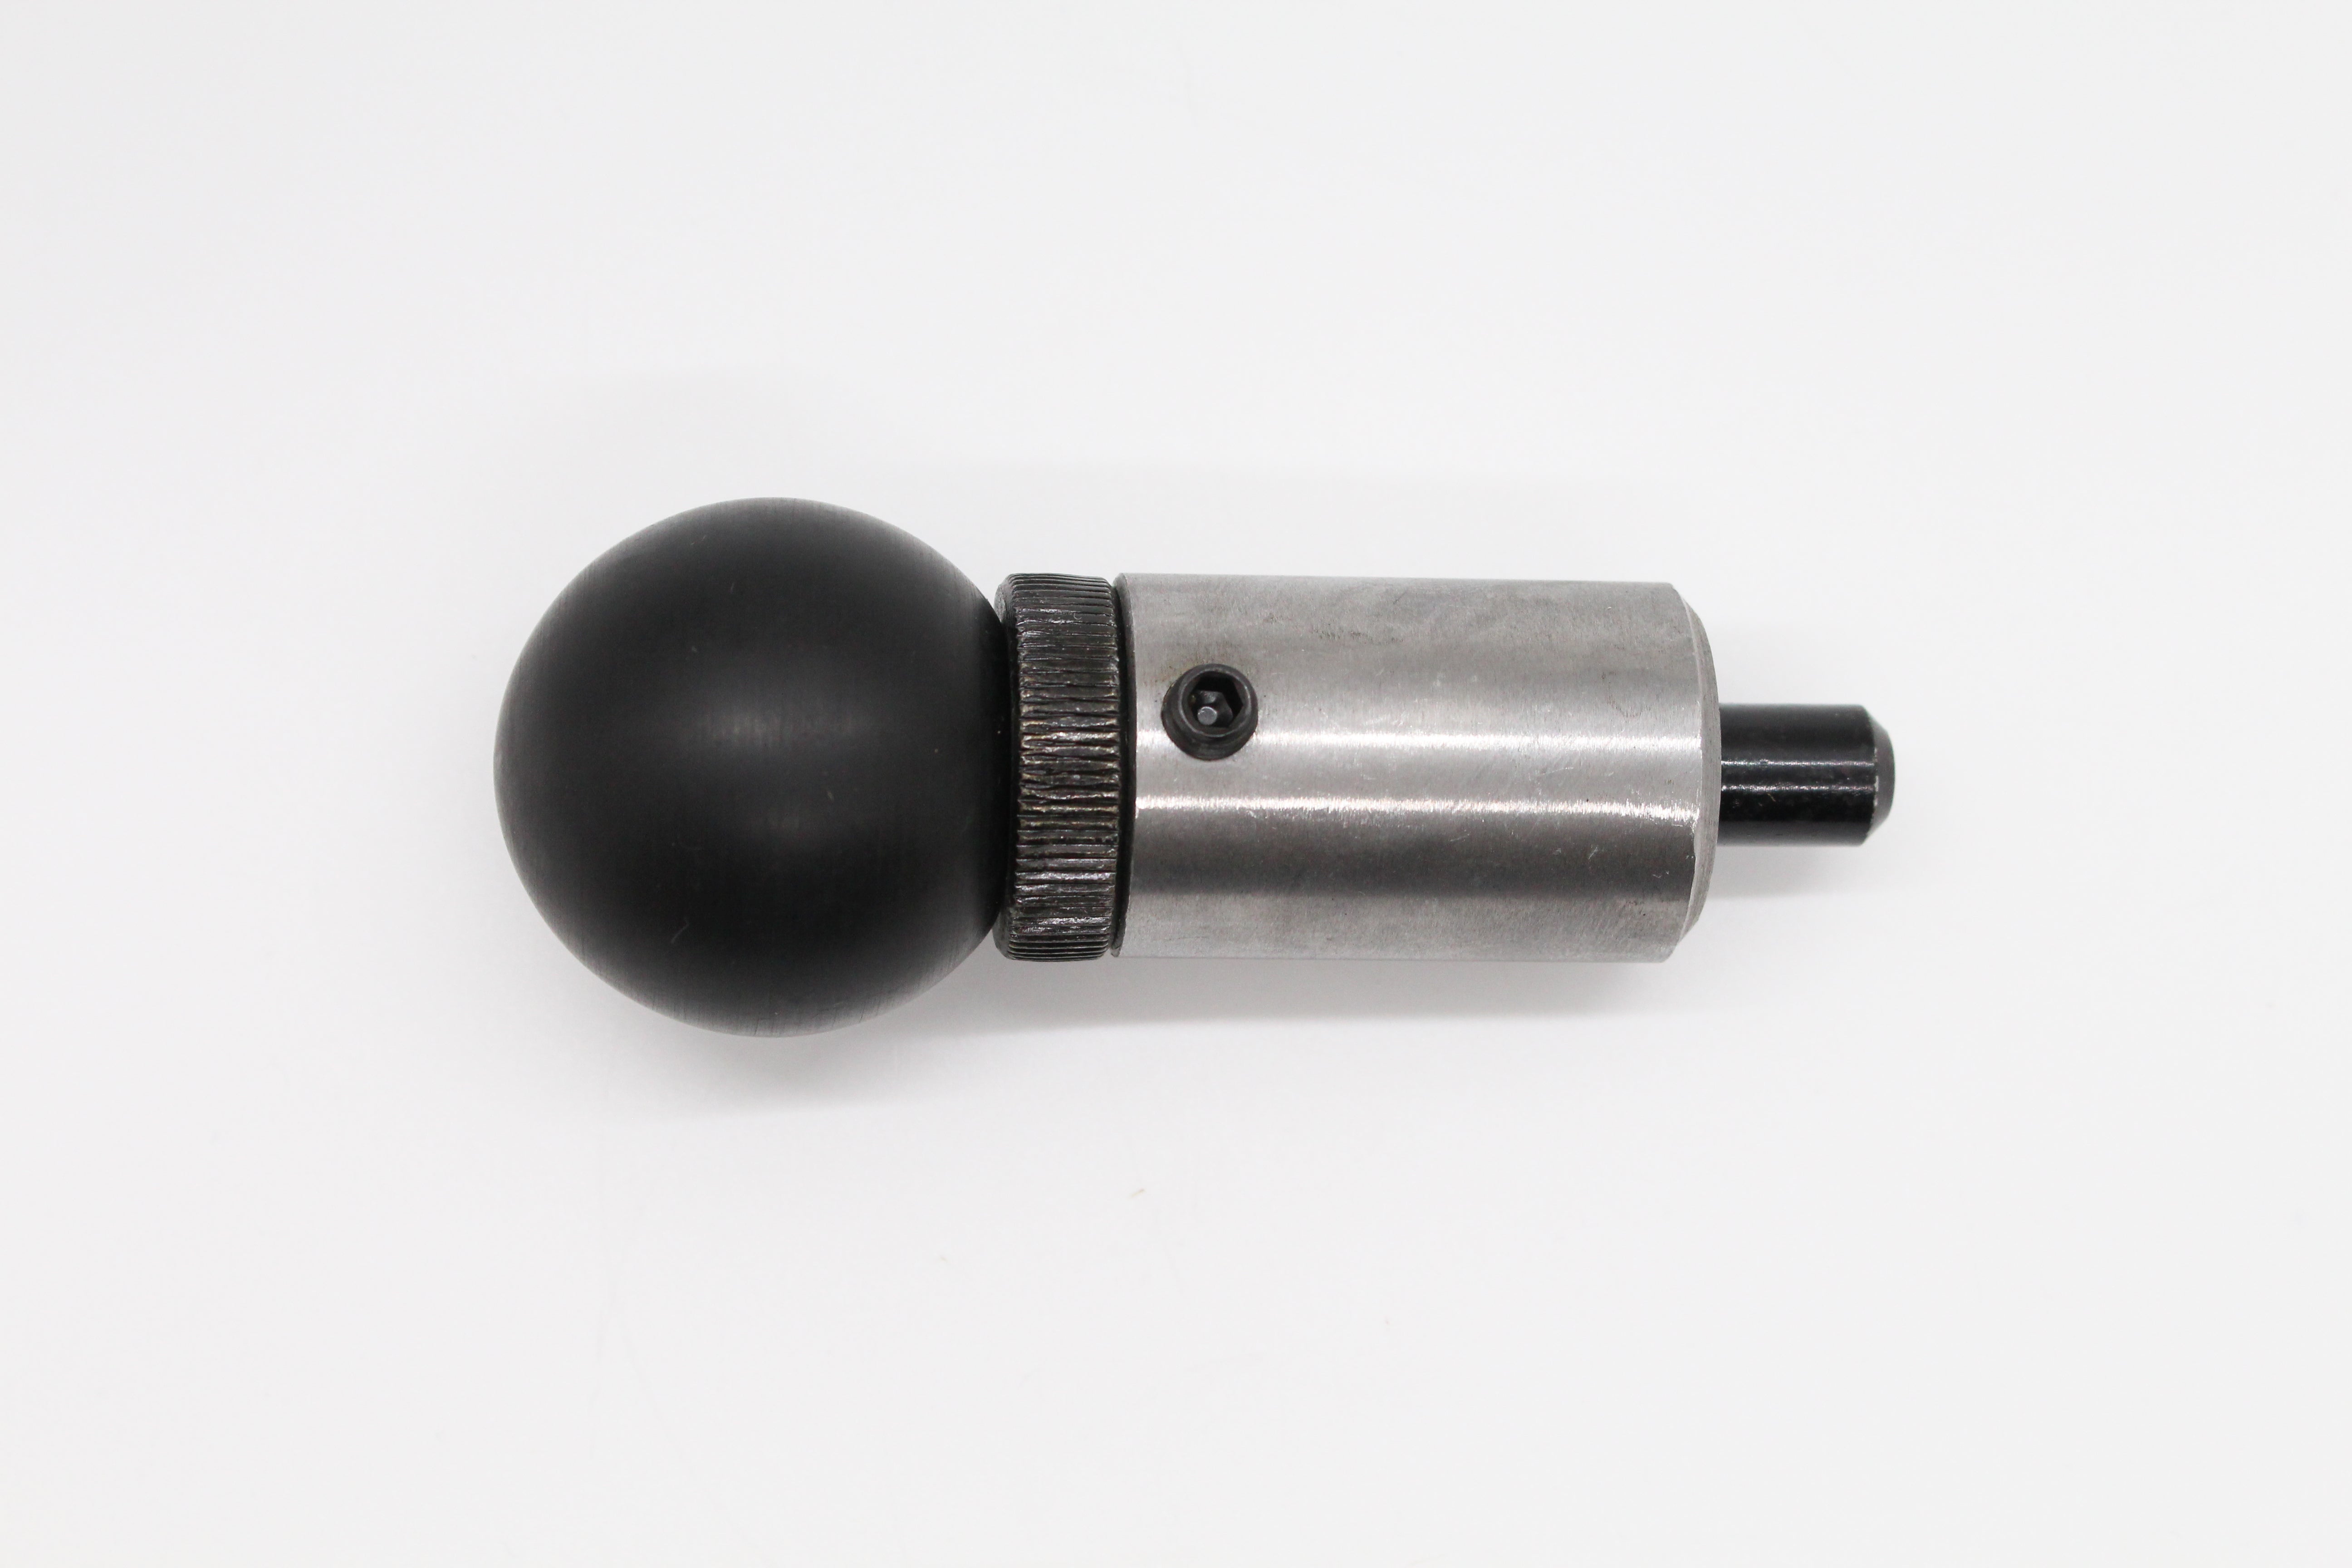 Pop Pin - 3/8” with Safety Set Screw